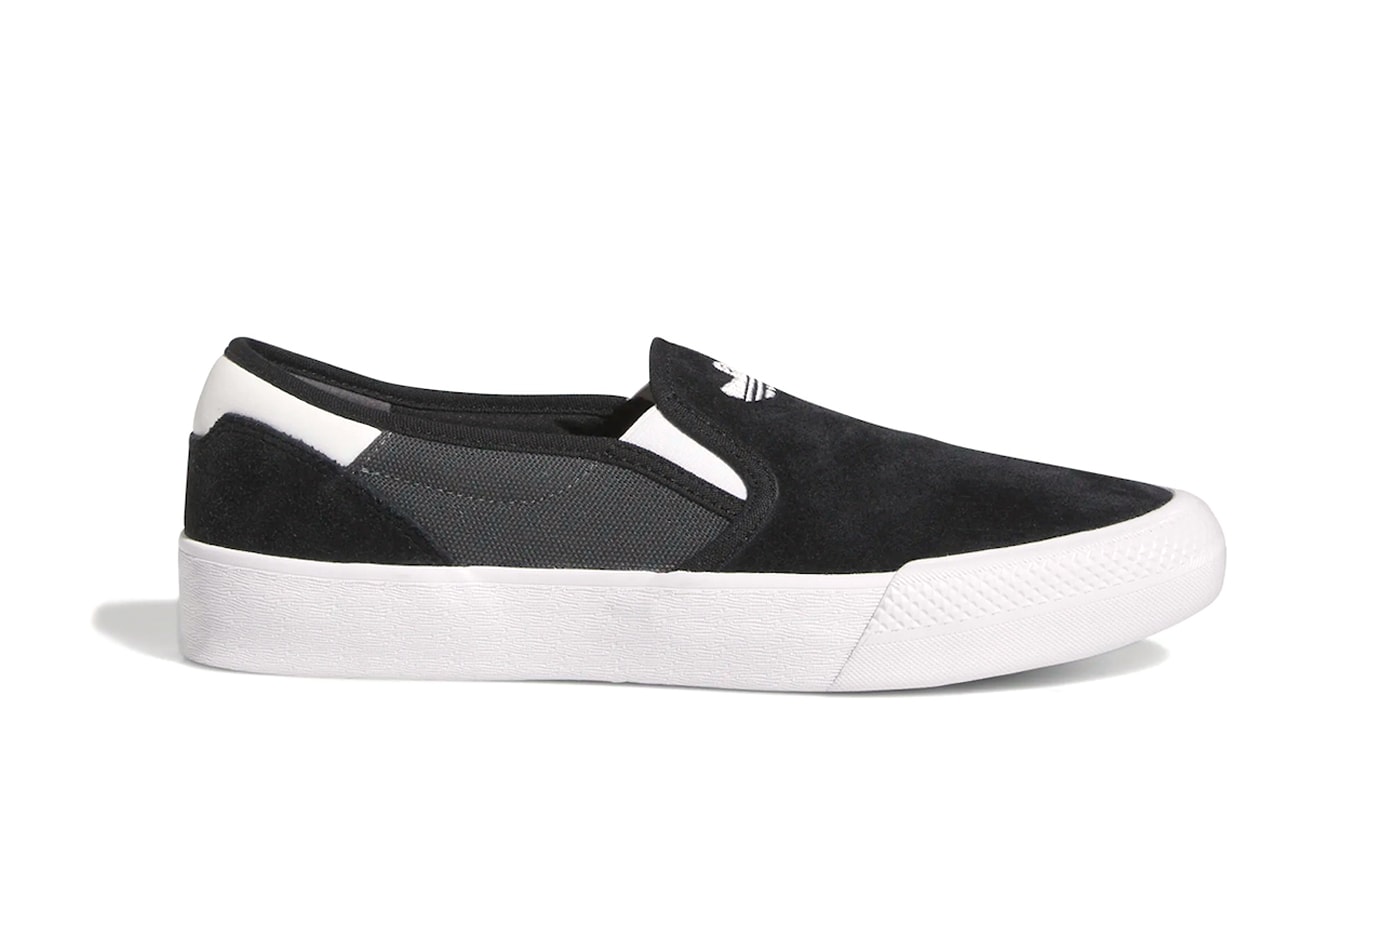 mark gonzales adidas shmoofoil slip on grey black suede IG5267 2023 release info date price